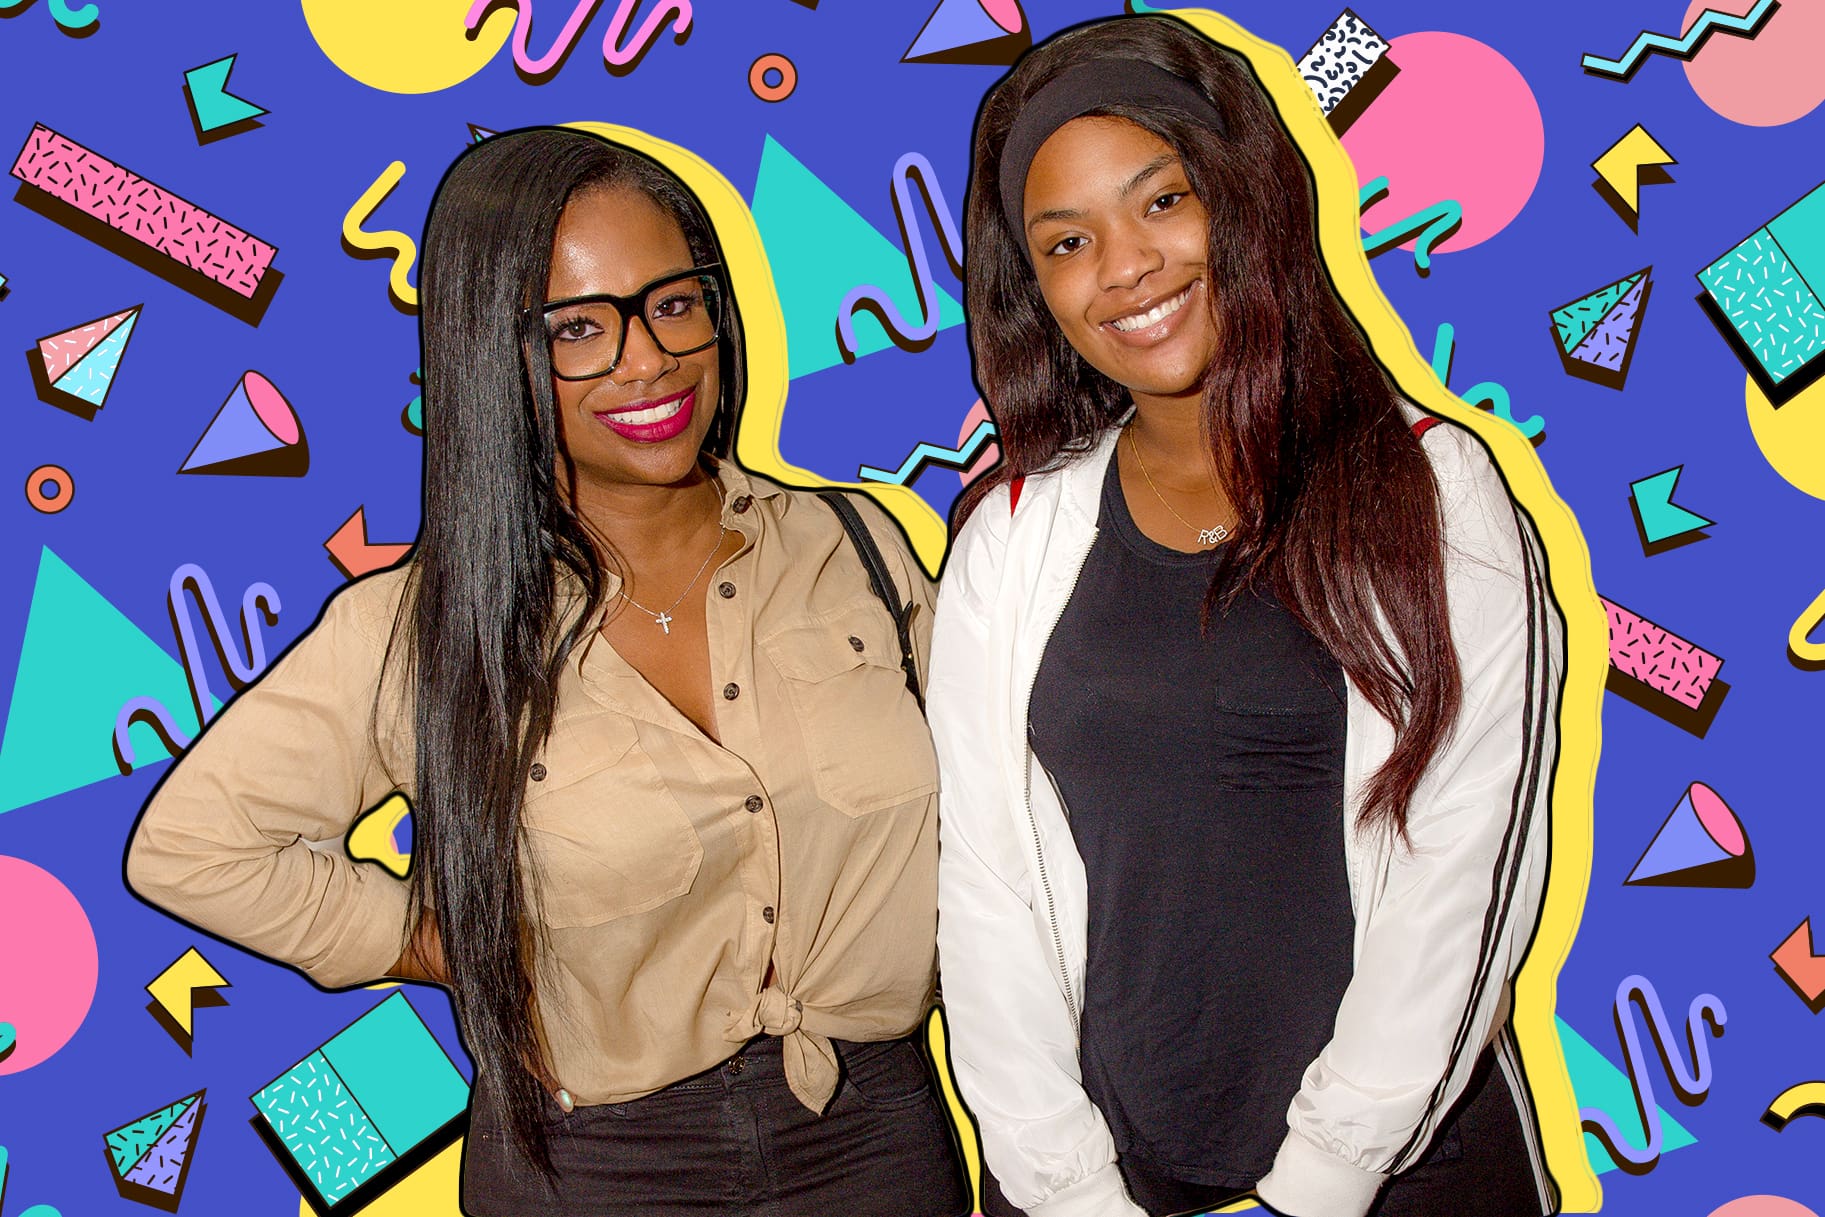 Kandi Burruss Goes To Tokyo With Her Daughter, Riley Burruss - See The Pics